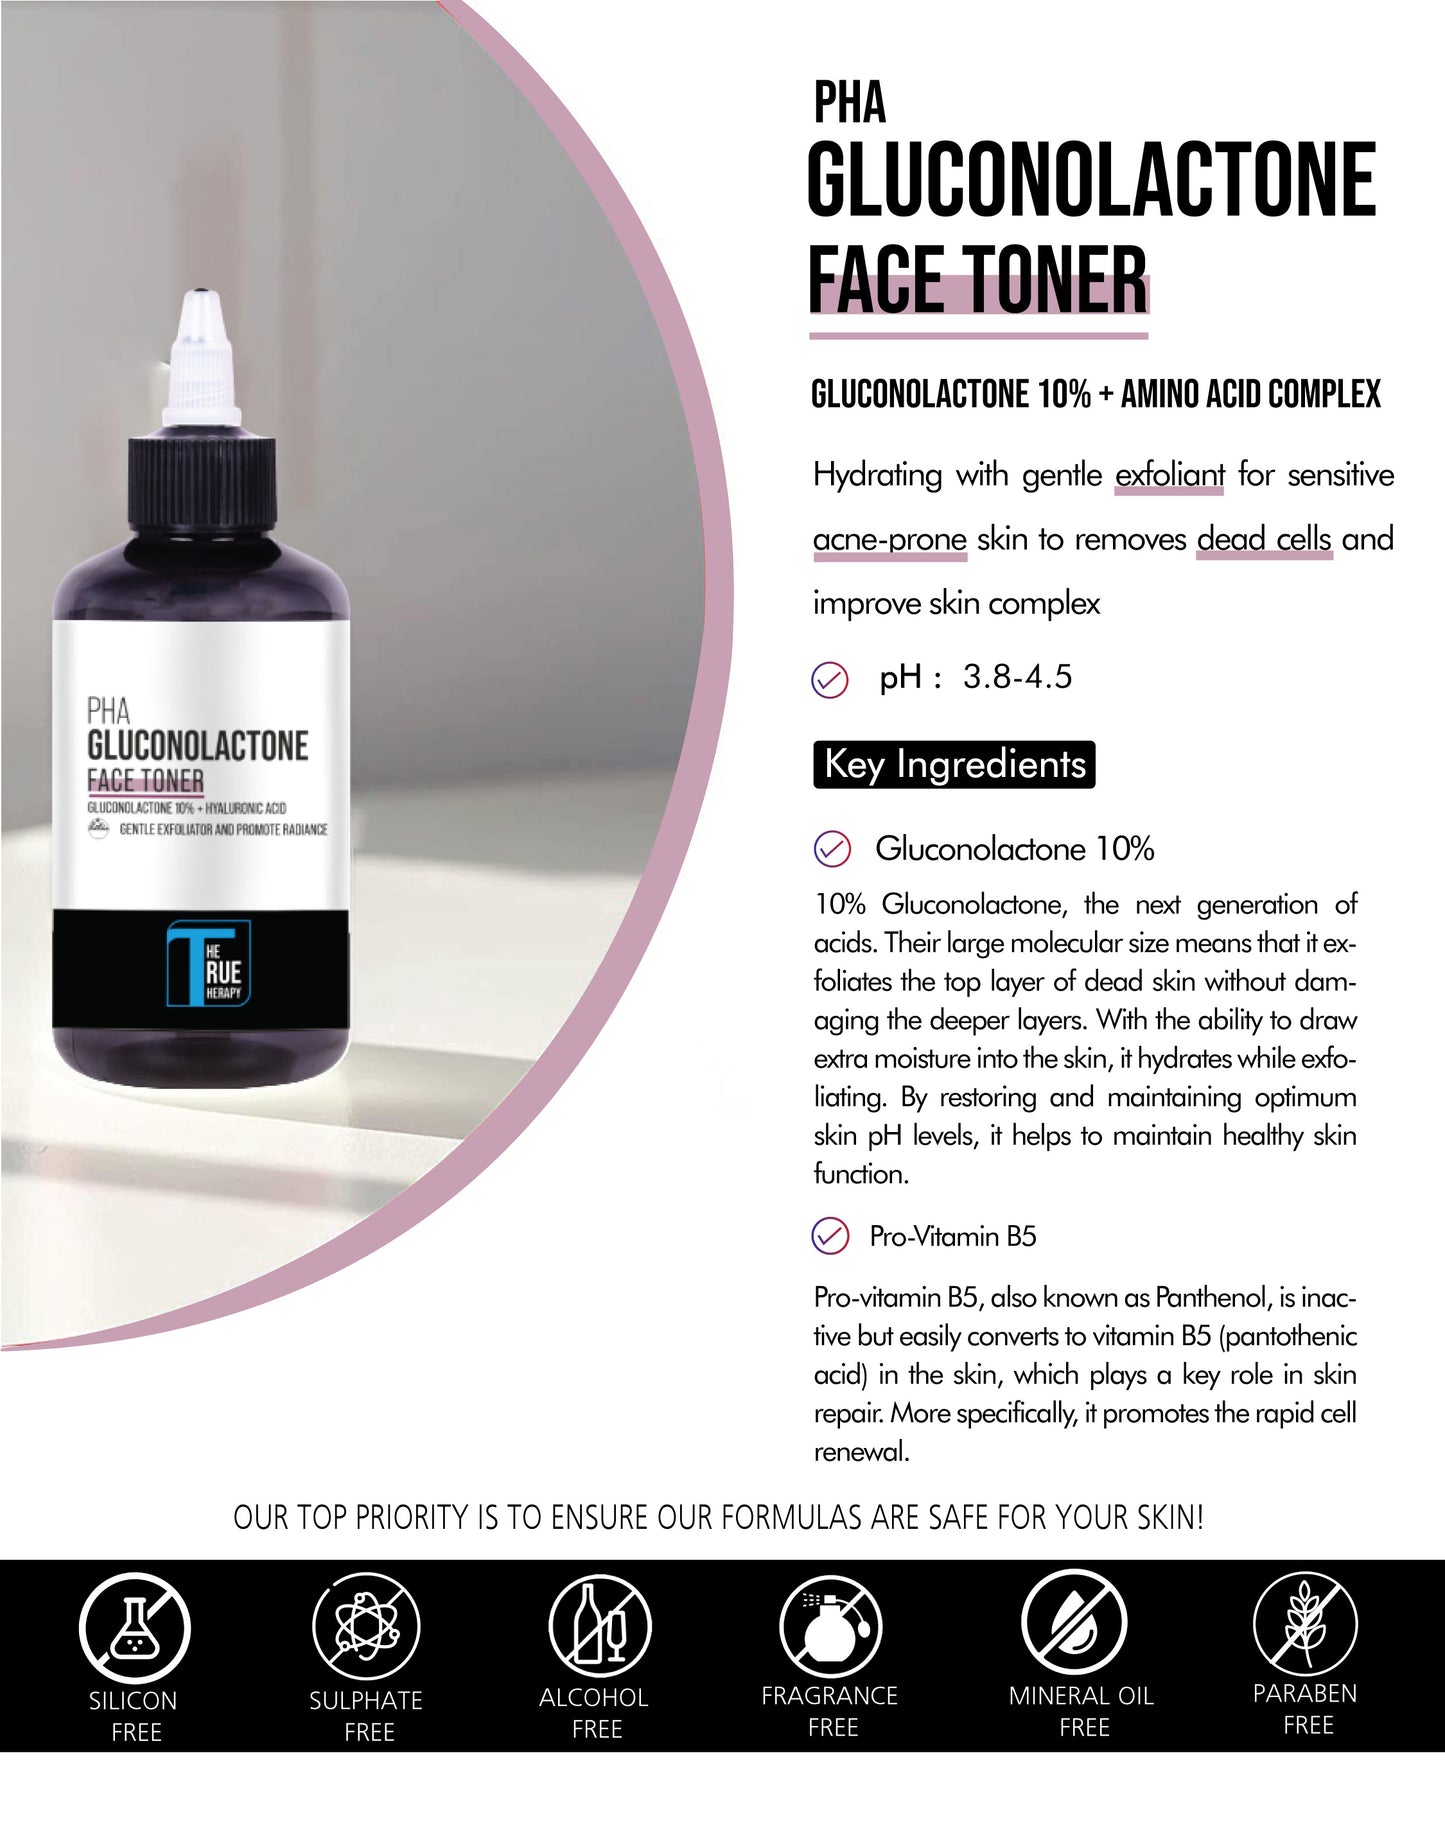 PHA GLUCONOLACTONE 10% FACE TONER Key Ingredients | The True Therapy